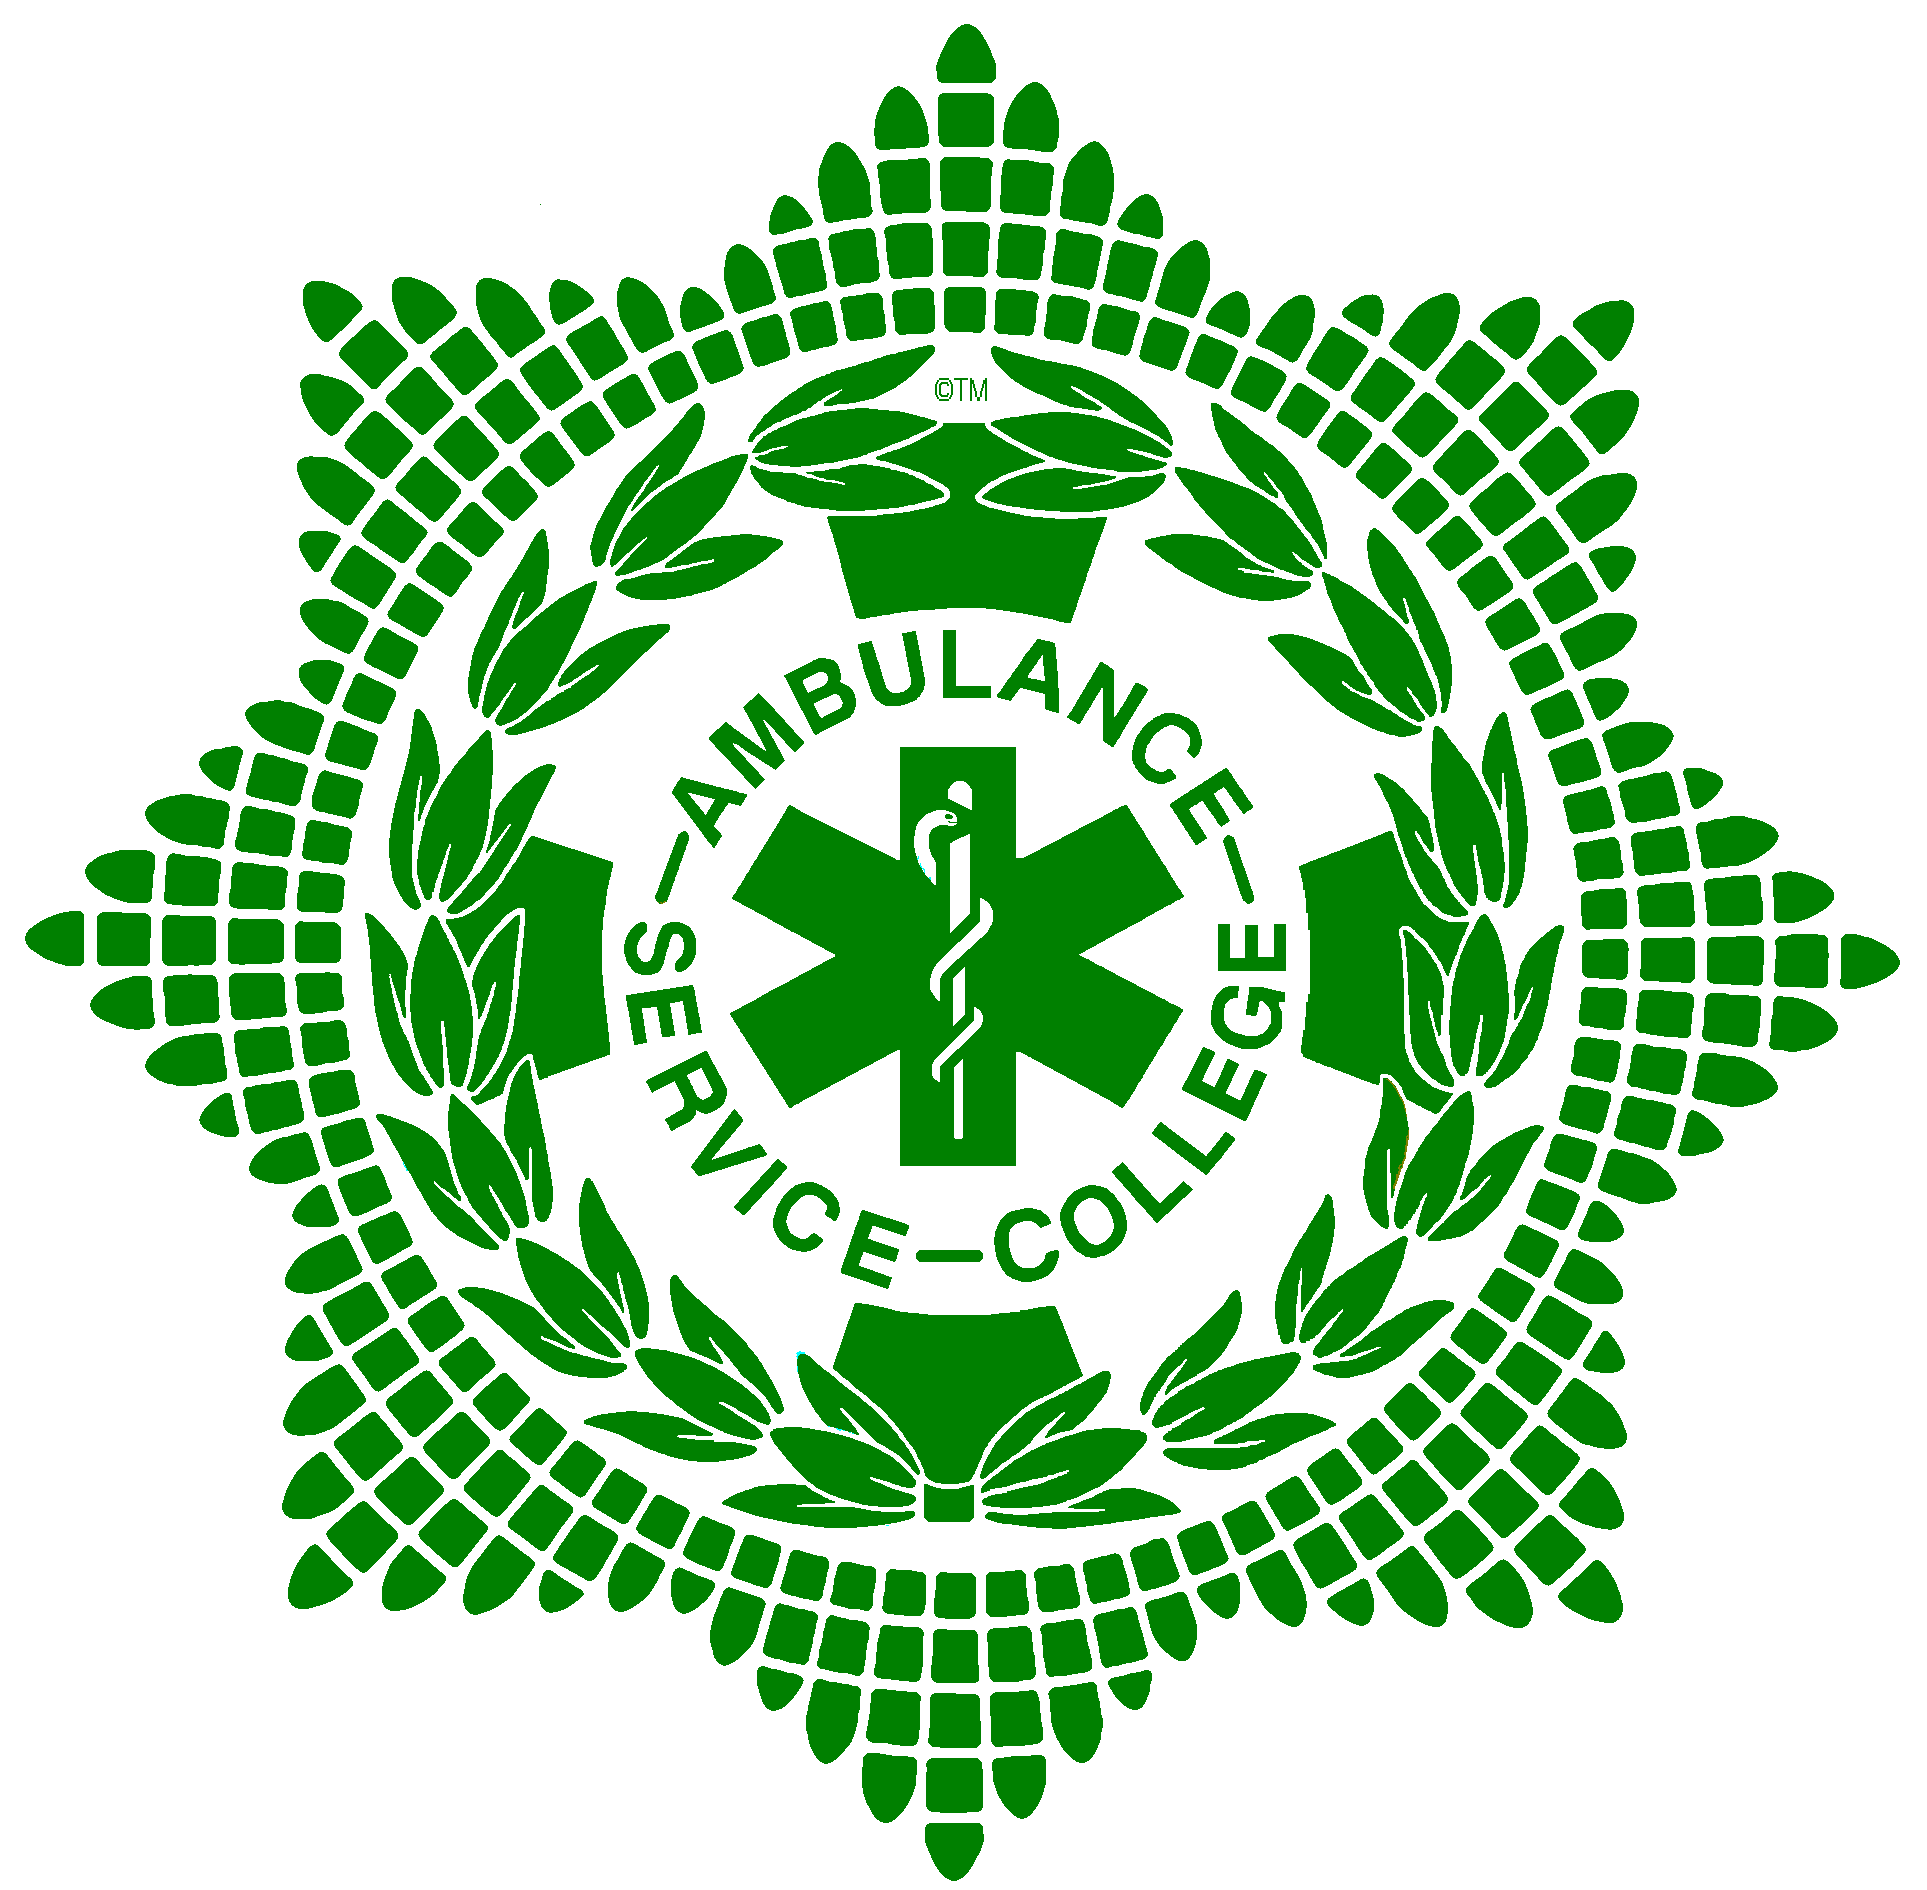 Ambulance Service College – First Aid